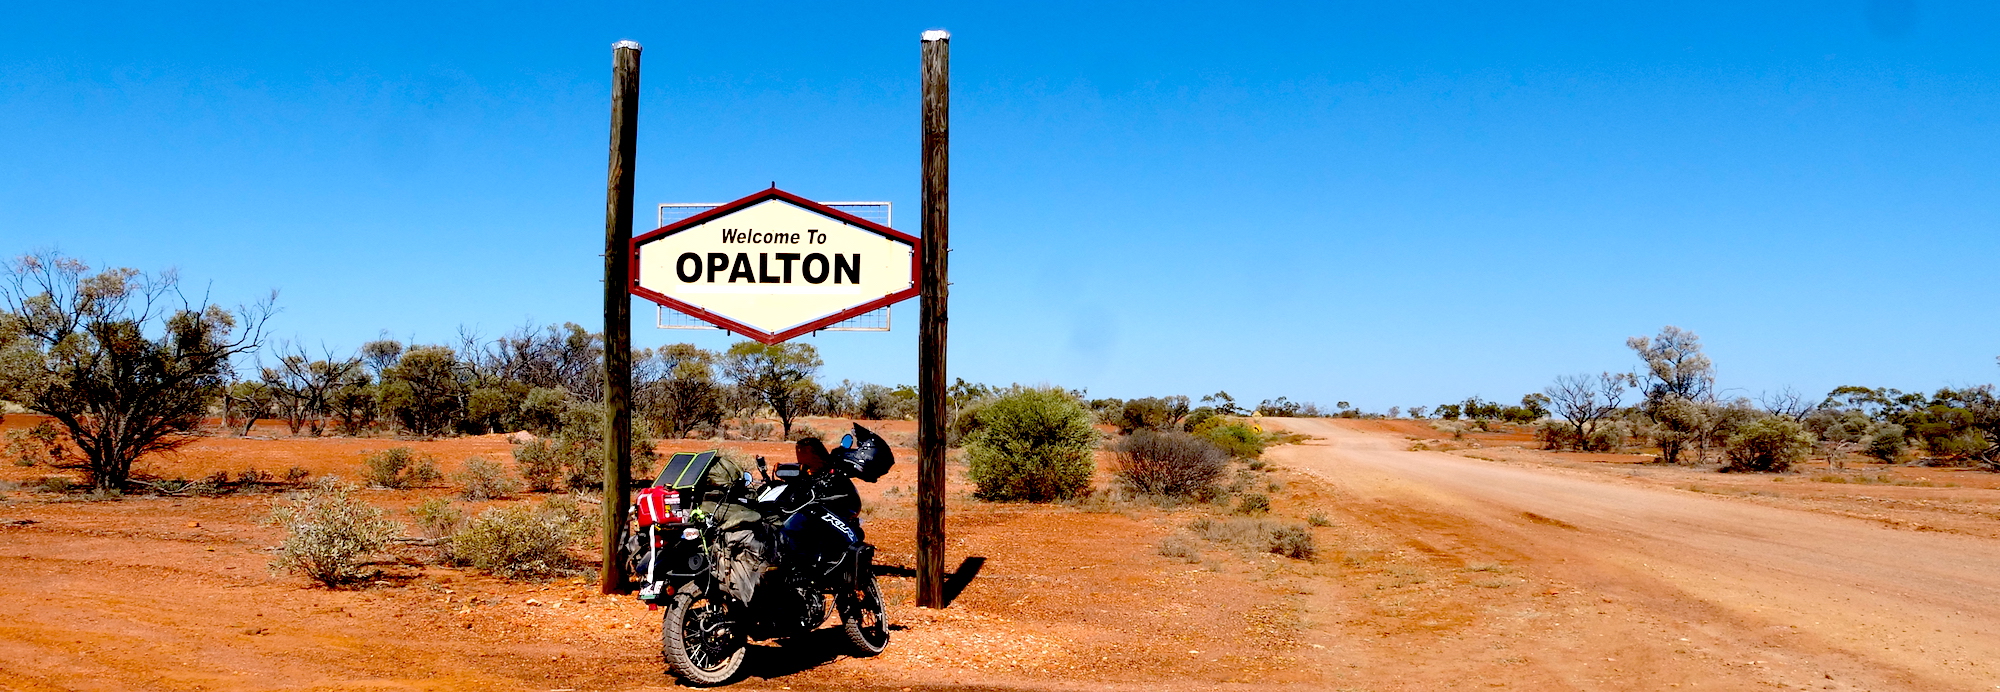 Opalton a frontier town like no other: Mad miners, guns and opals – Day Five